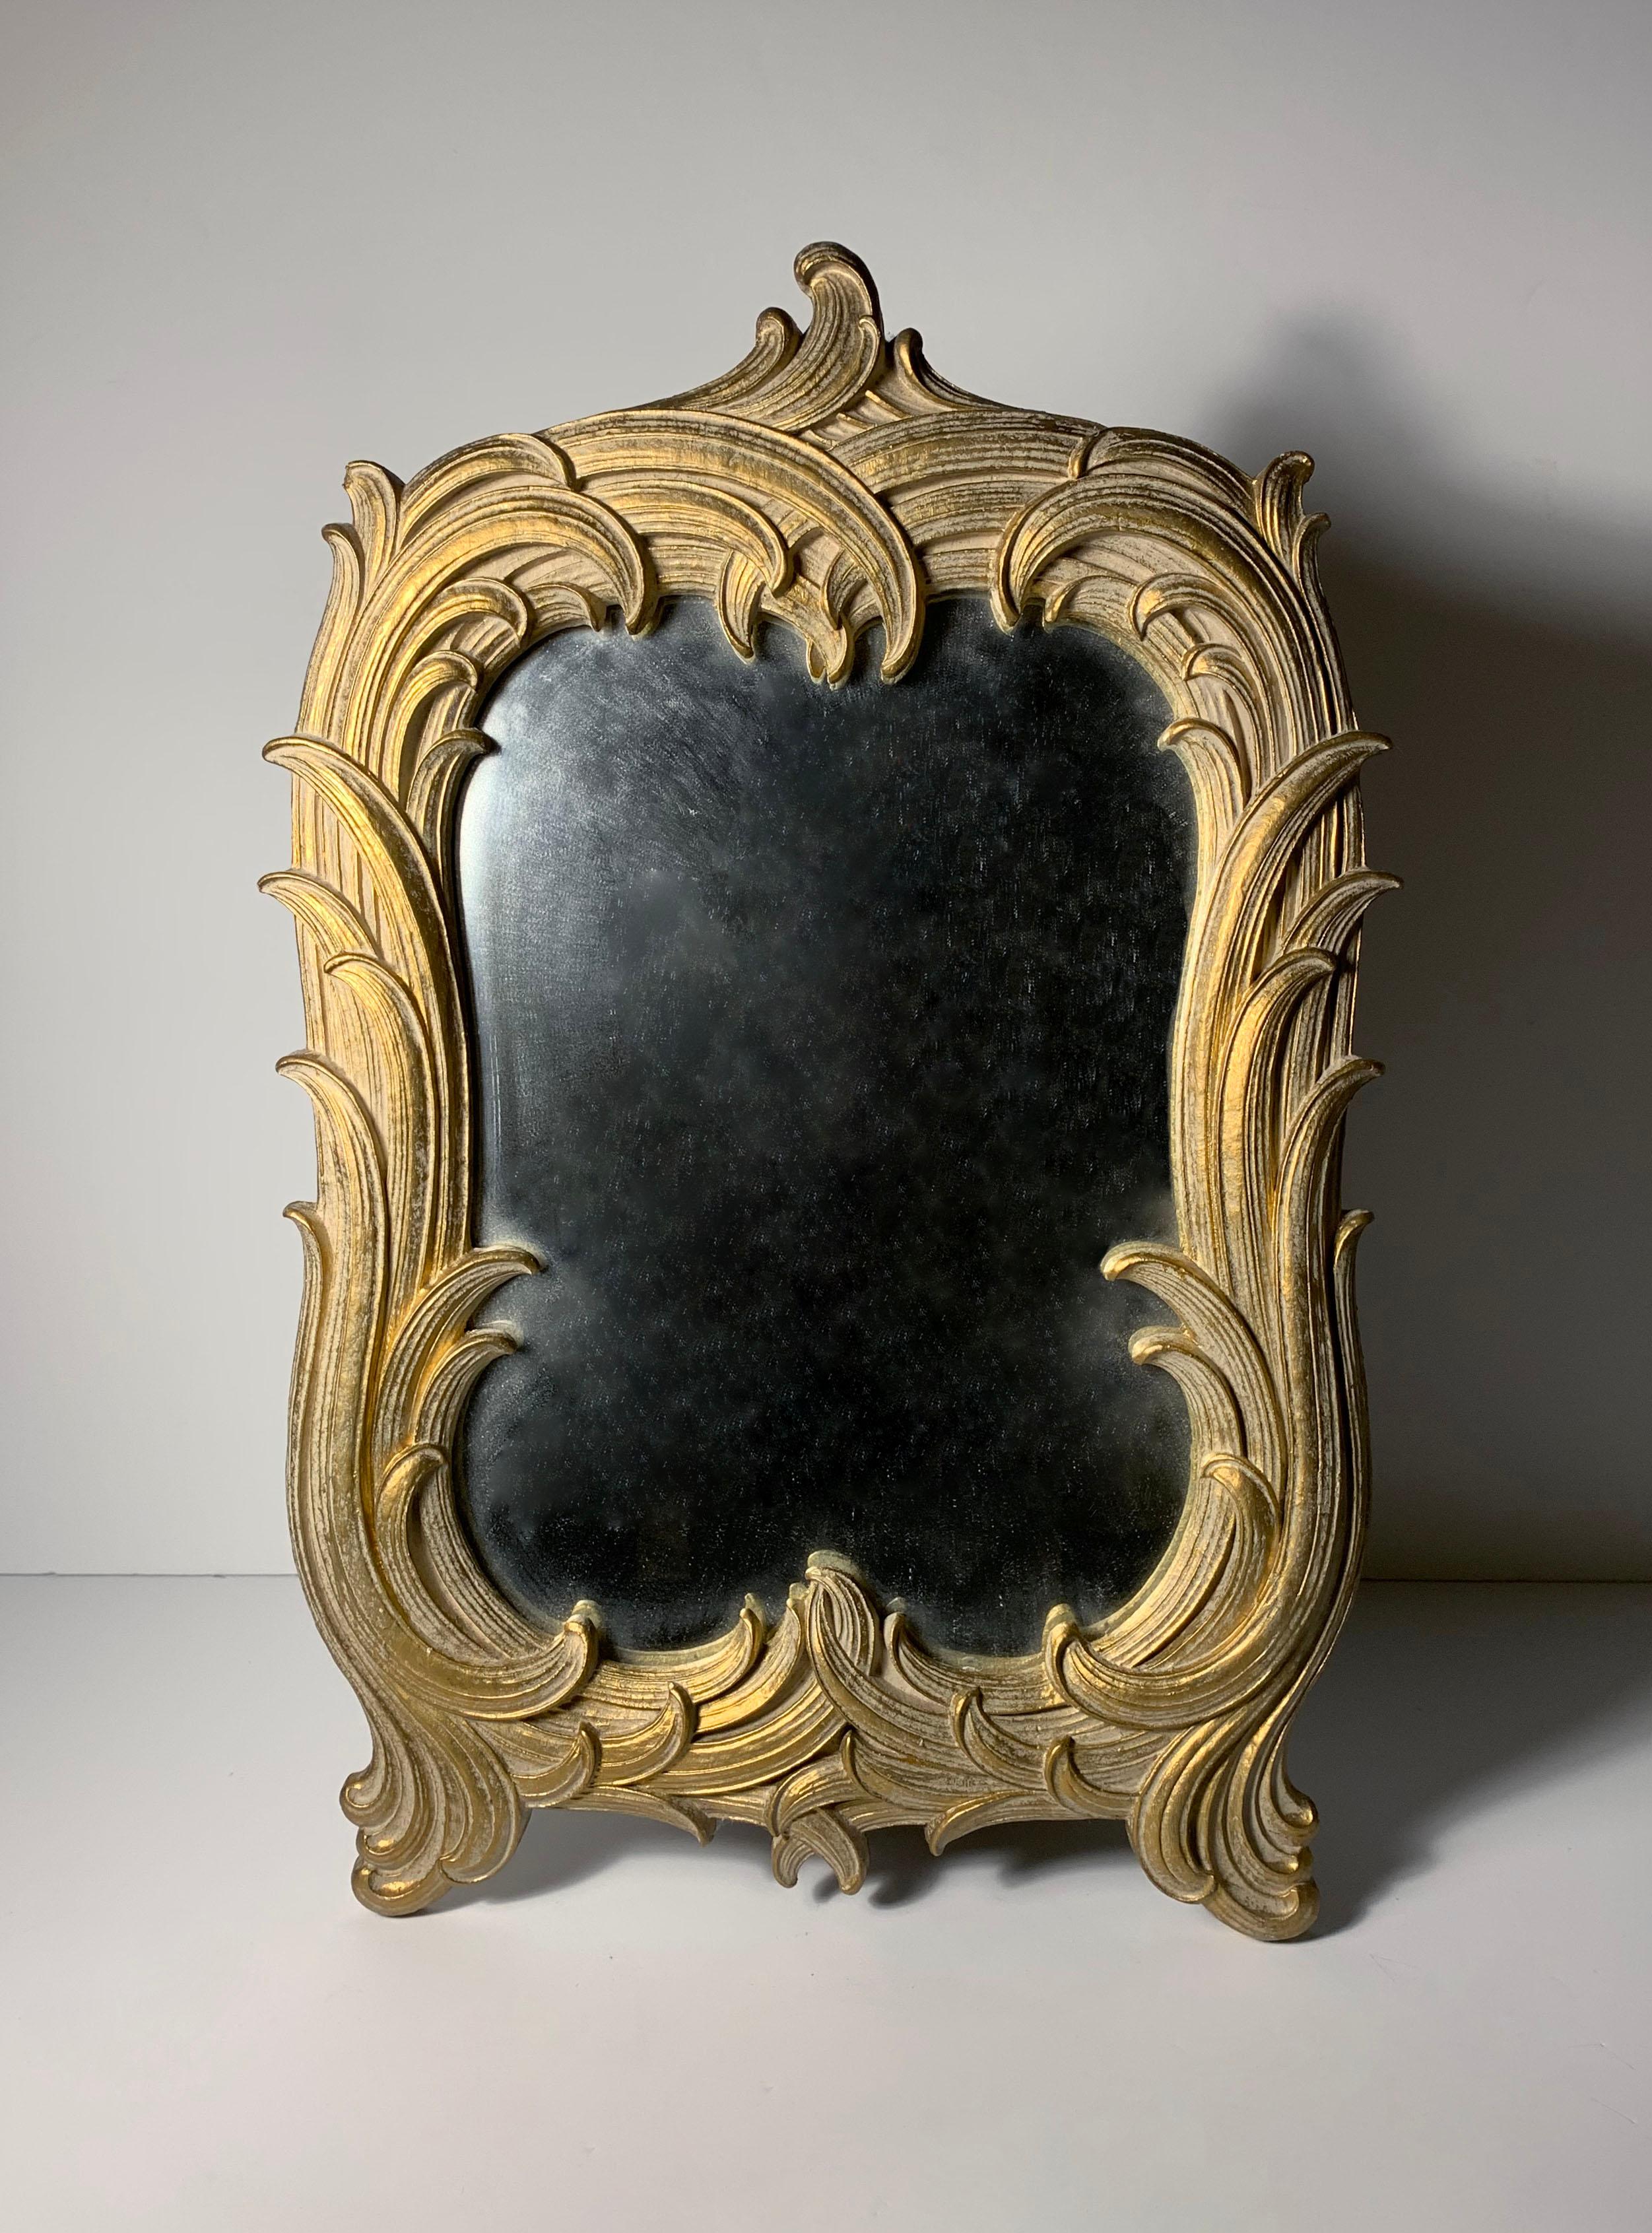 Hollywood Regency Vintage Table Top Mirror with easel back. Style of Serge Roche and Dorothy Draper

Can also be modified to hang on the wall.